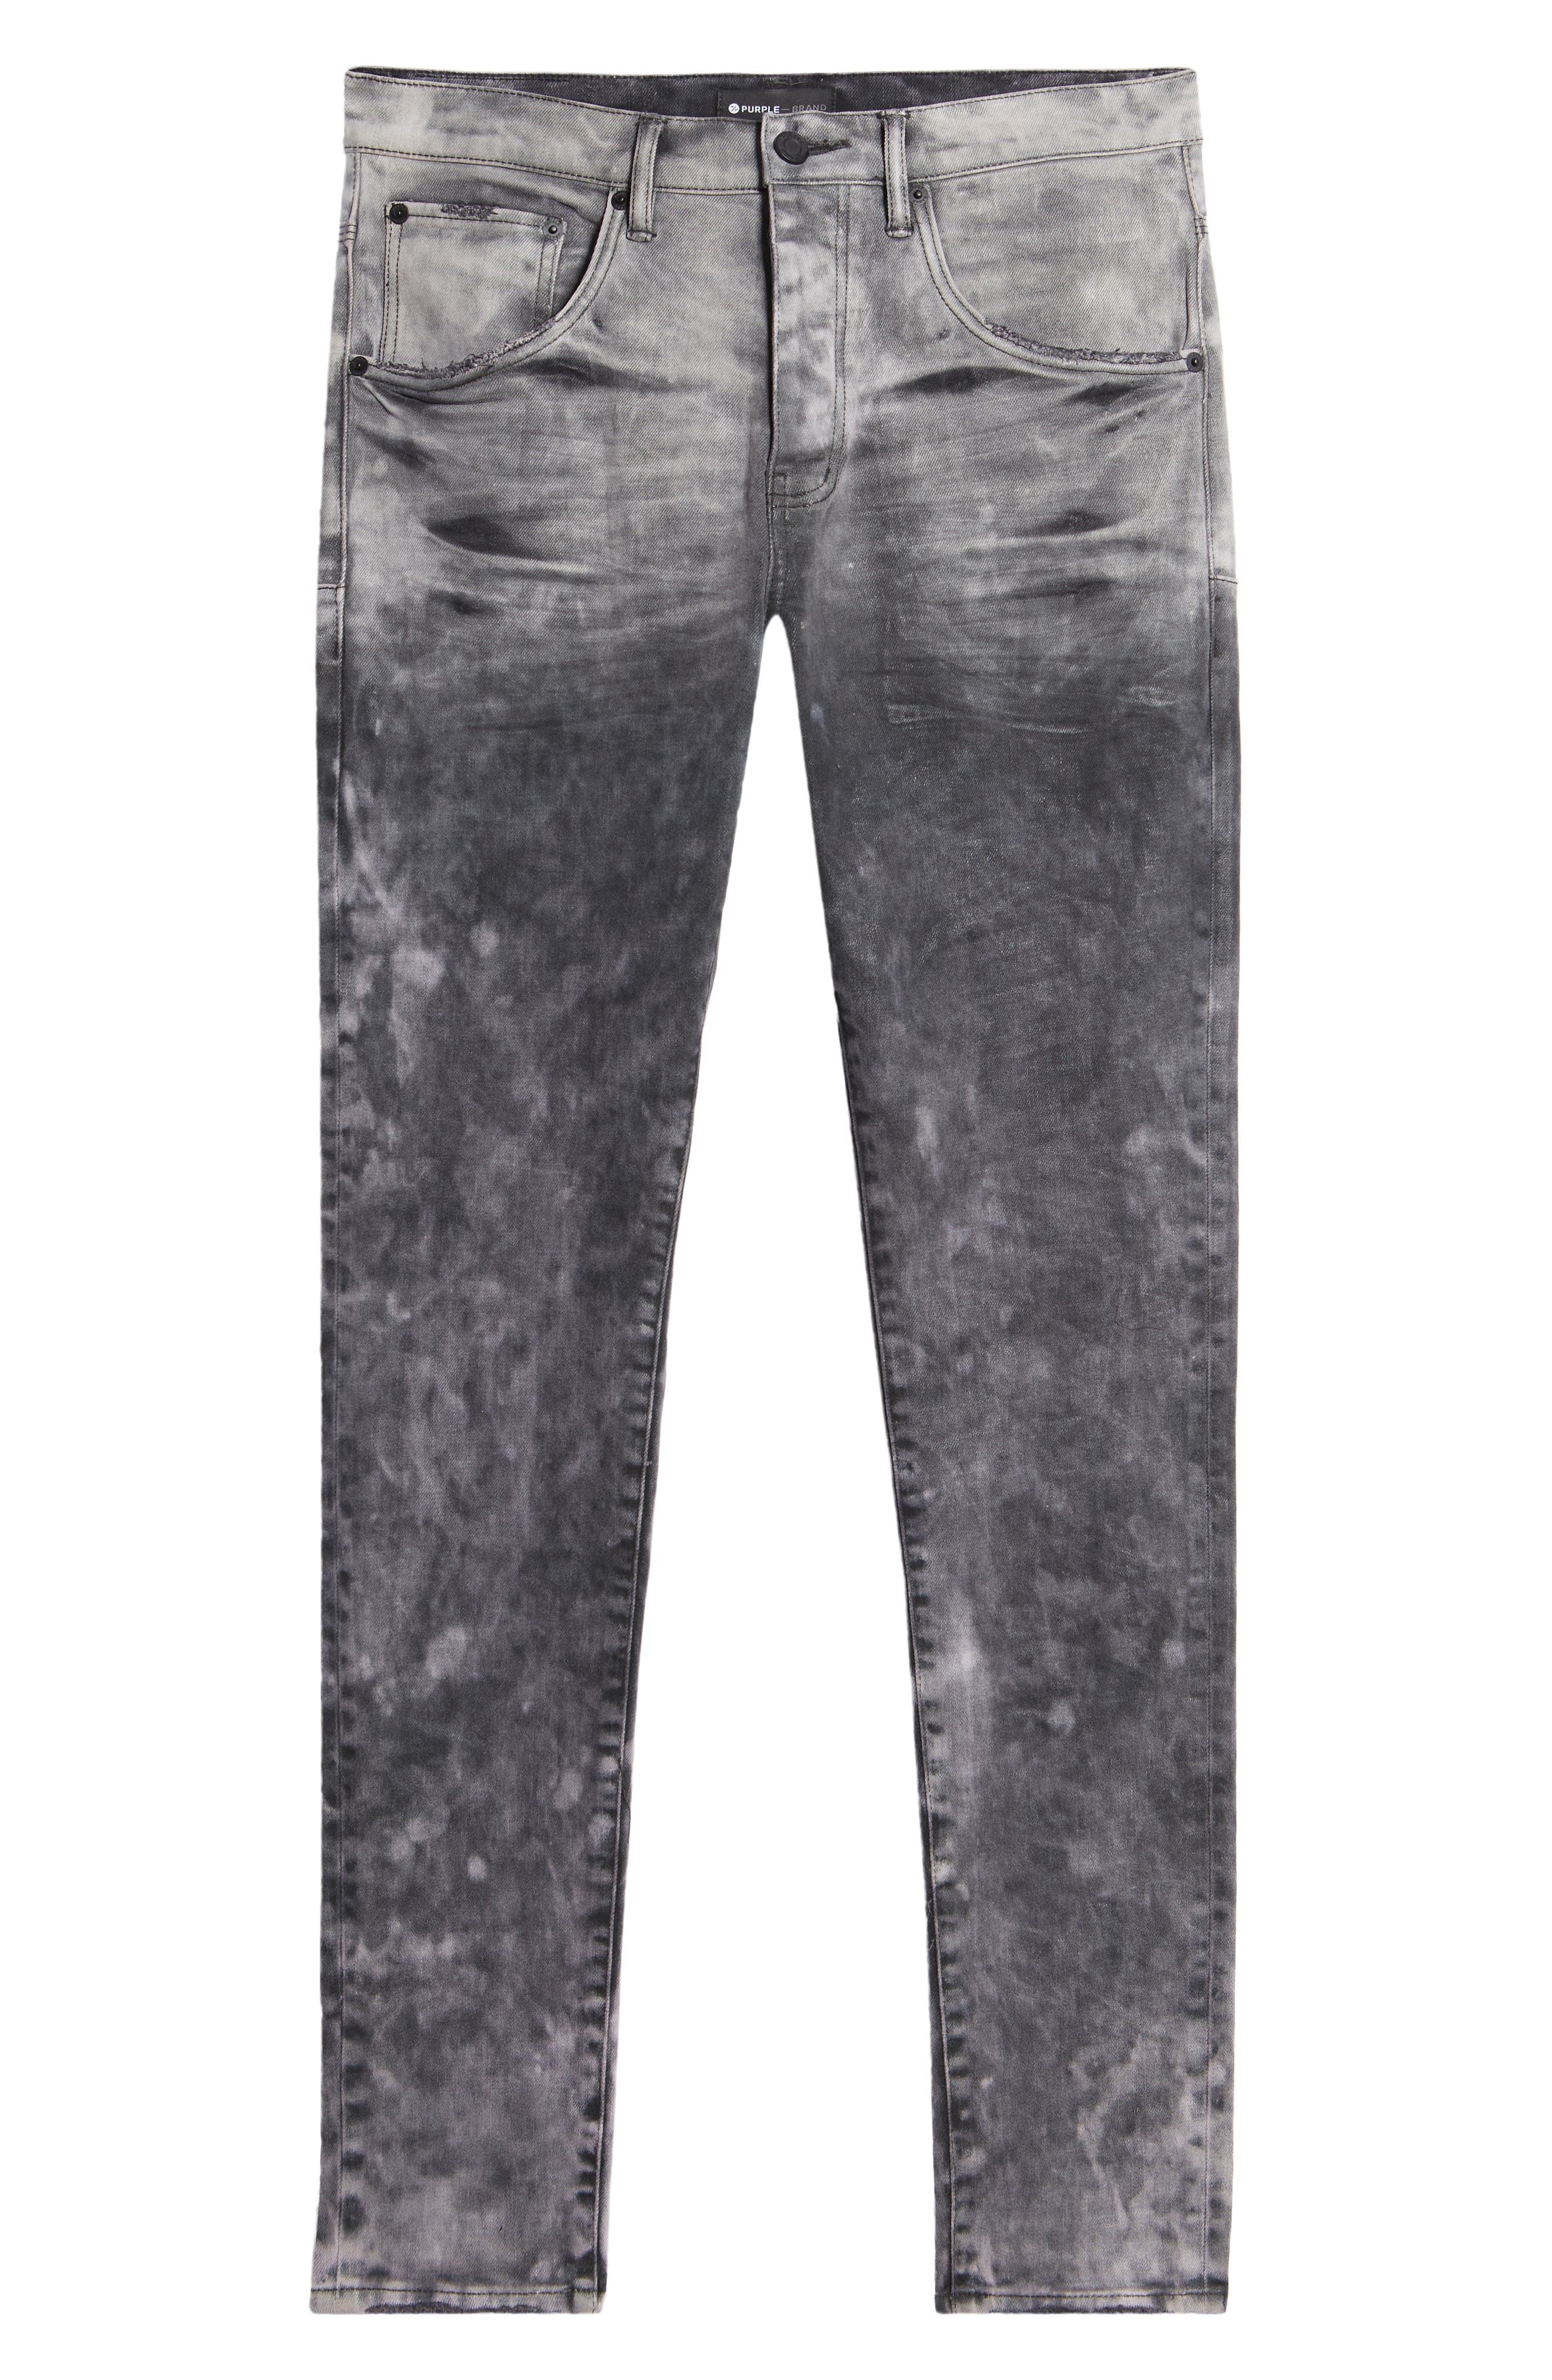 Skinny Fit Jeans in Light Dirty Wax